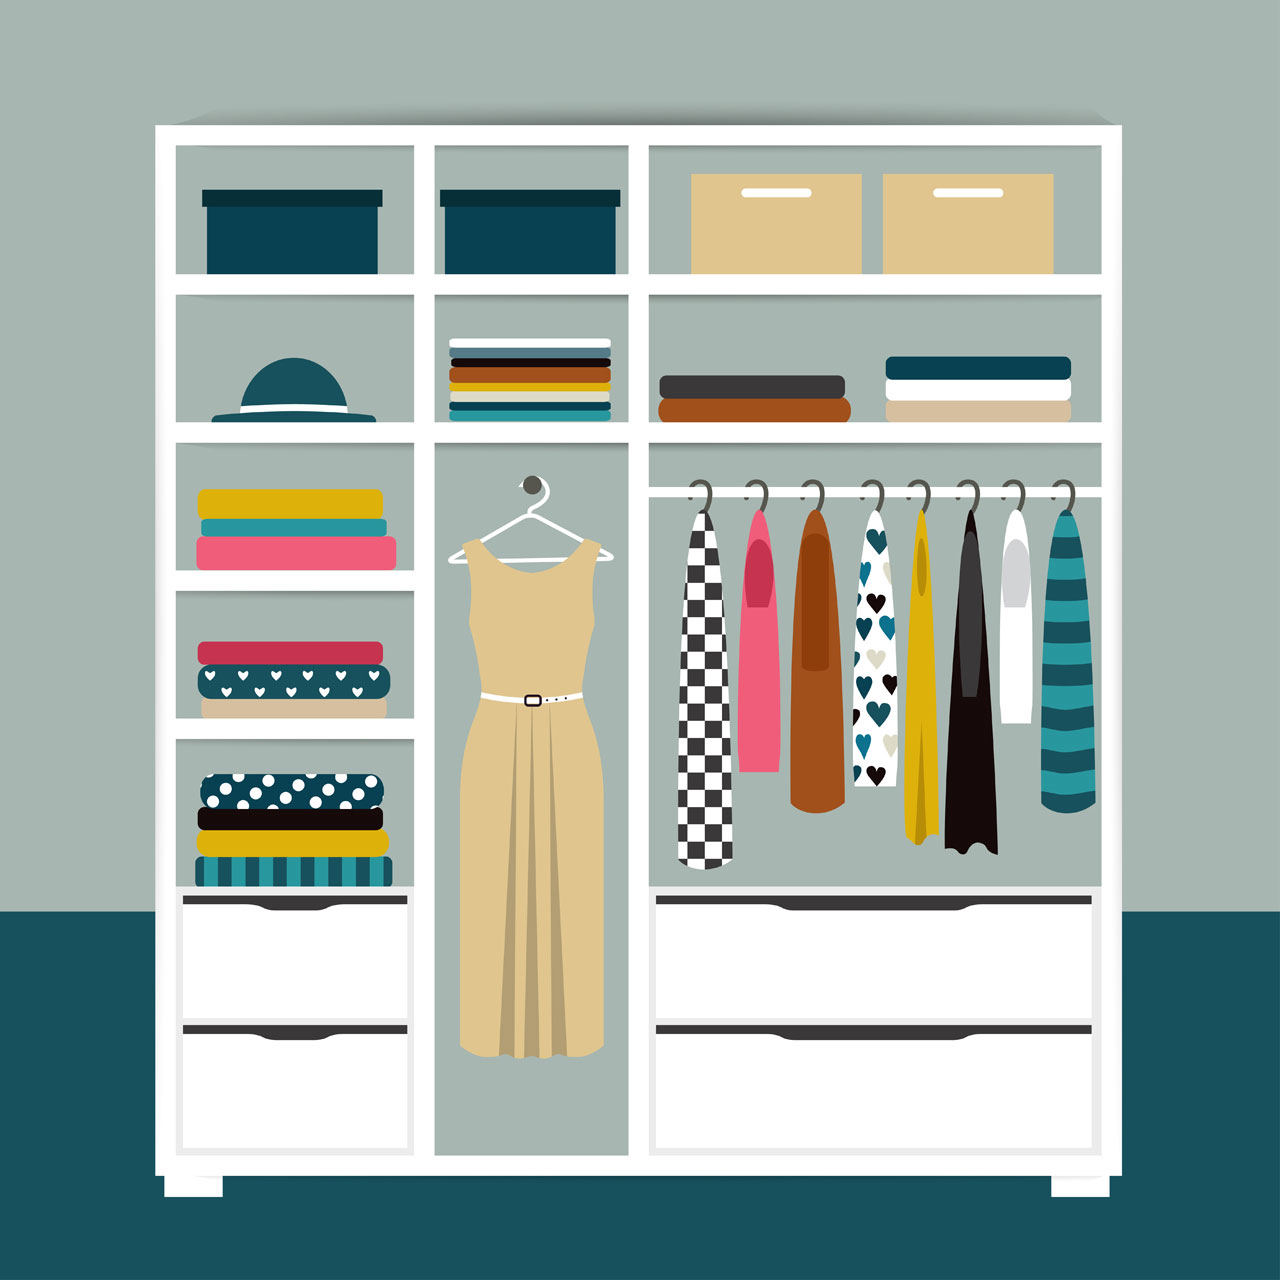 Capsule minimalistic open wardrobe wooden closet with tidy clothes shirts sweaters boxes shoes